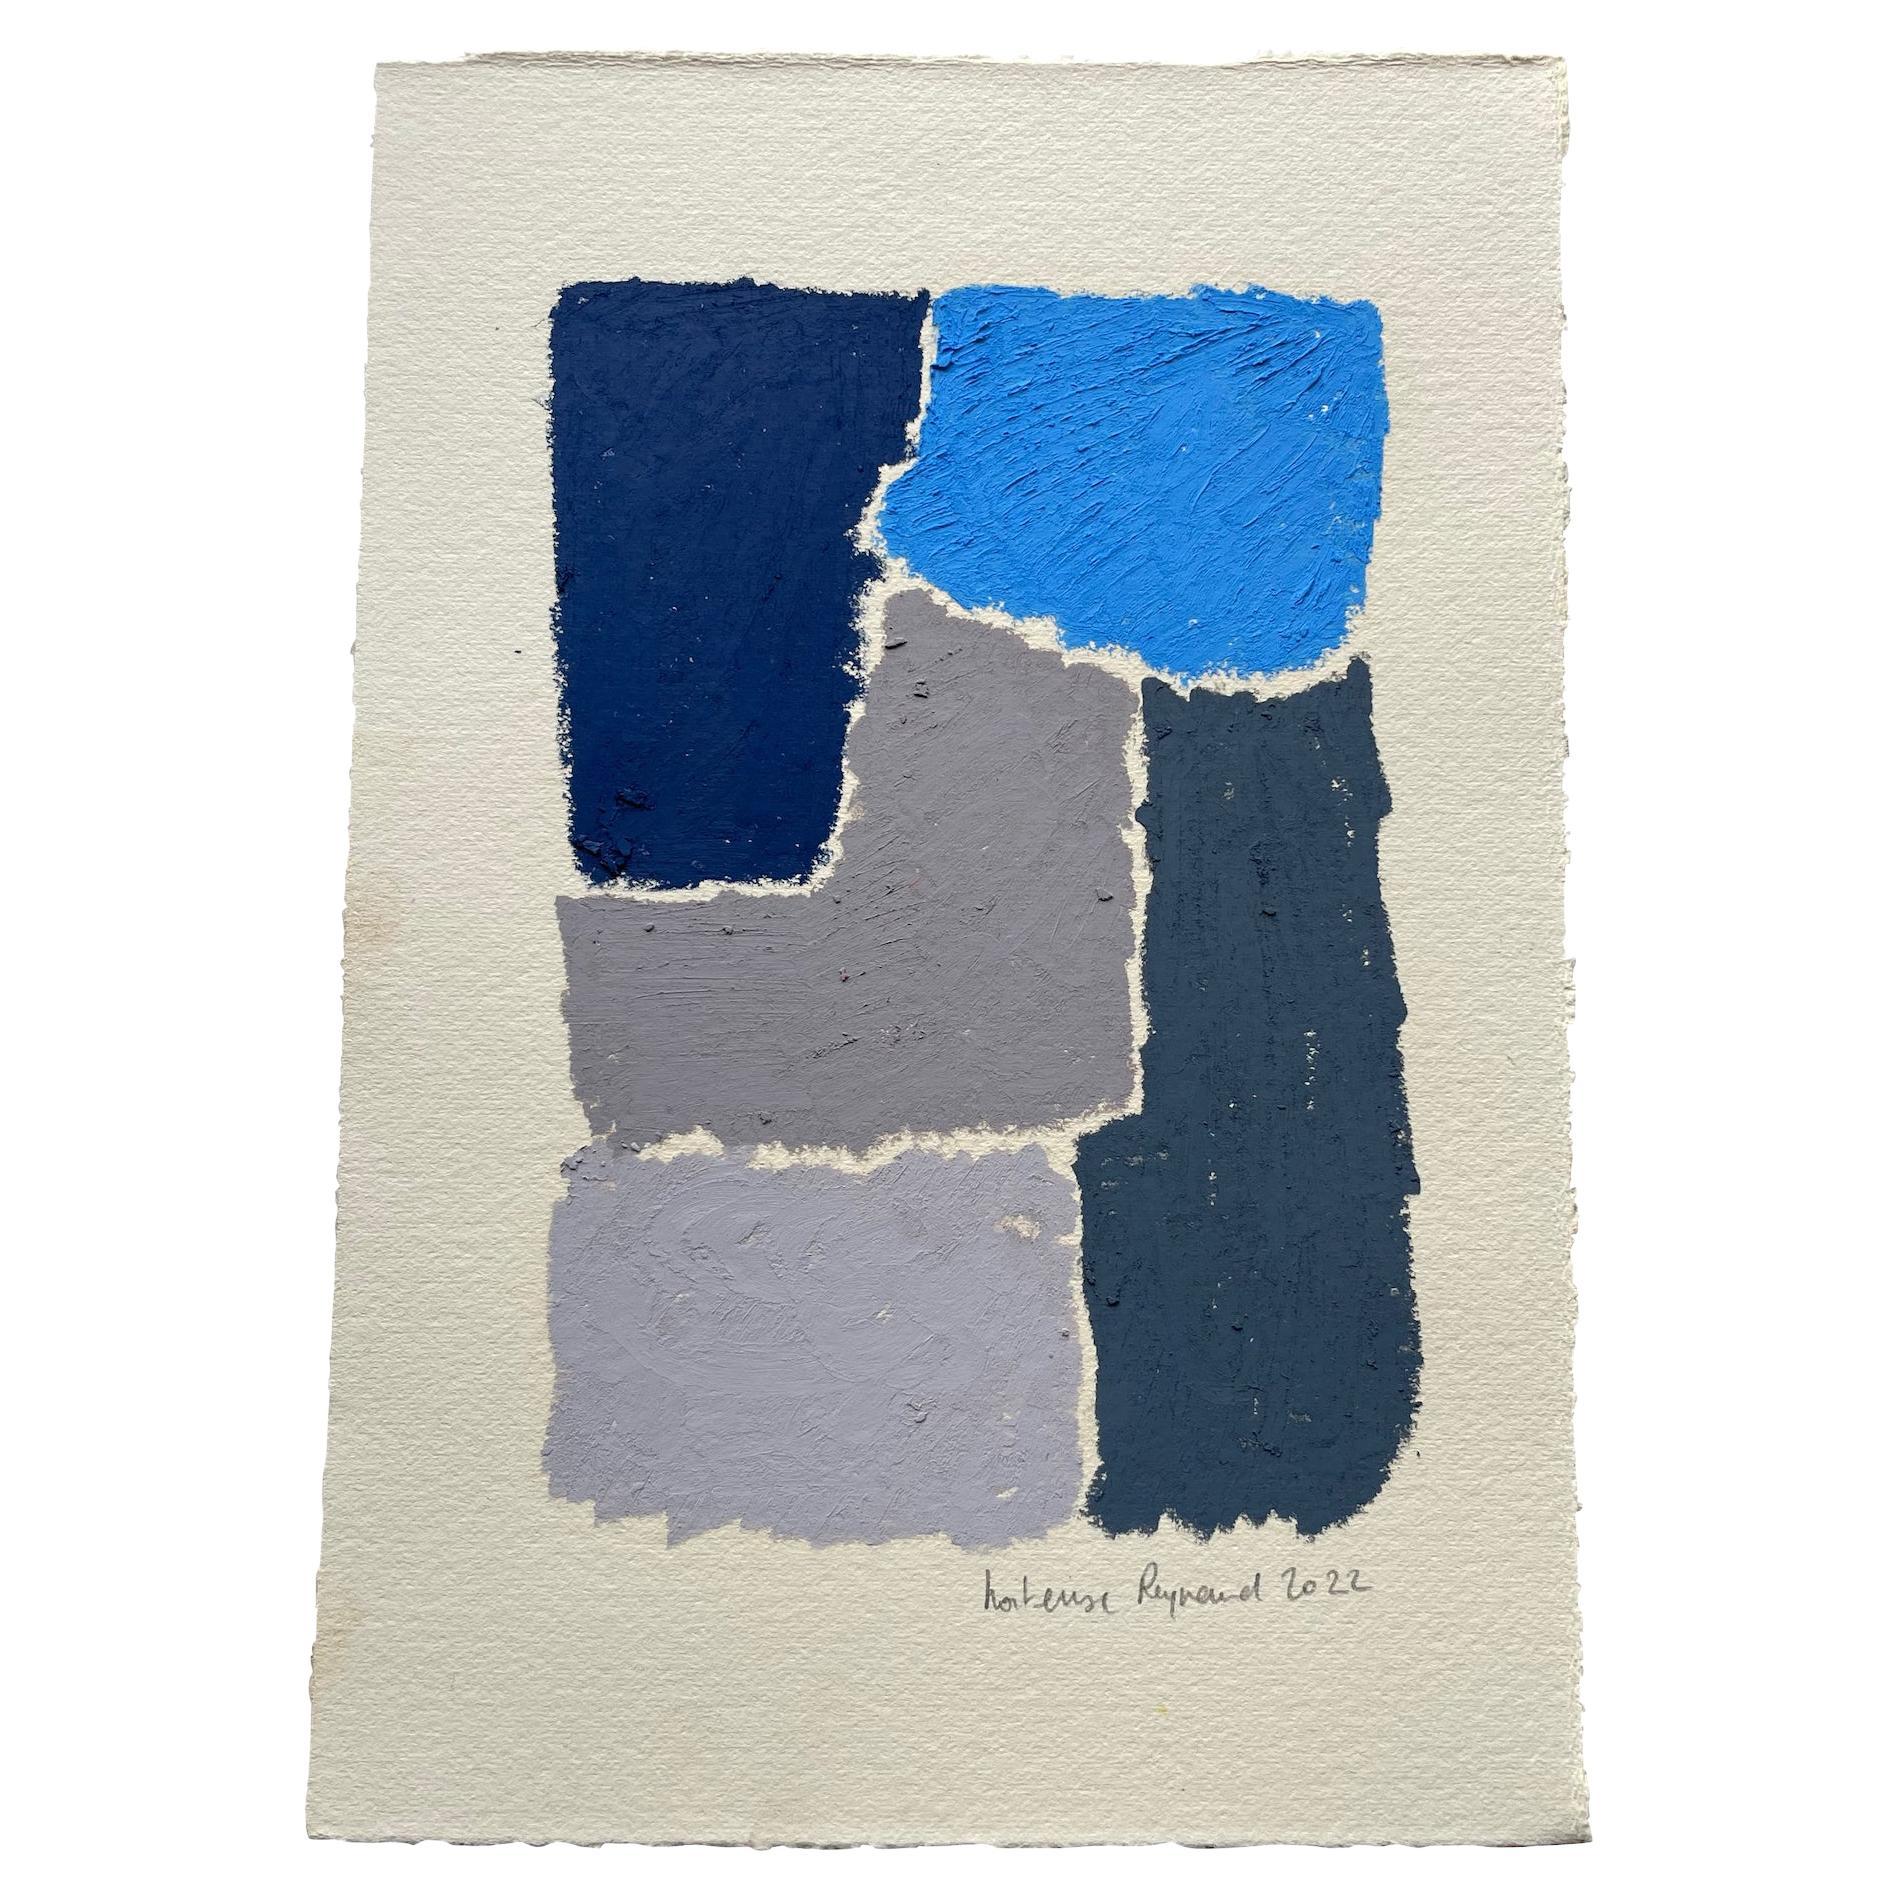 Contemporary French artist Hortense Reynaud.
Abstract painting using oil pastels in shades of grey and blue which give 
a very rich and creamy finish.
Thick quality paper.
Newly framed.
From a large collection of her work.
Signed by the